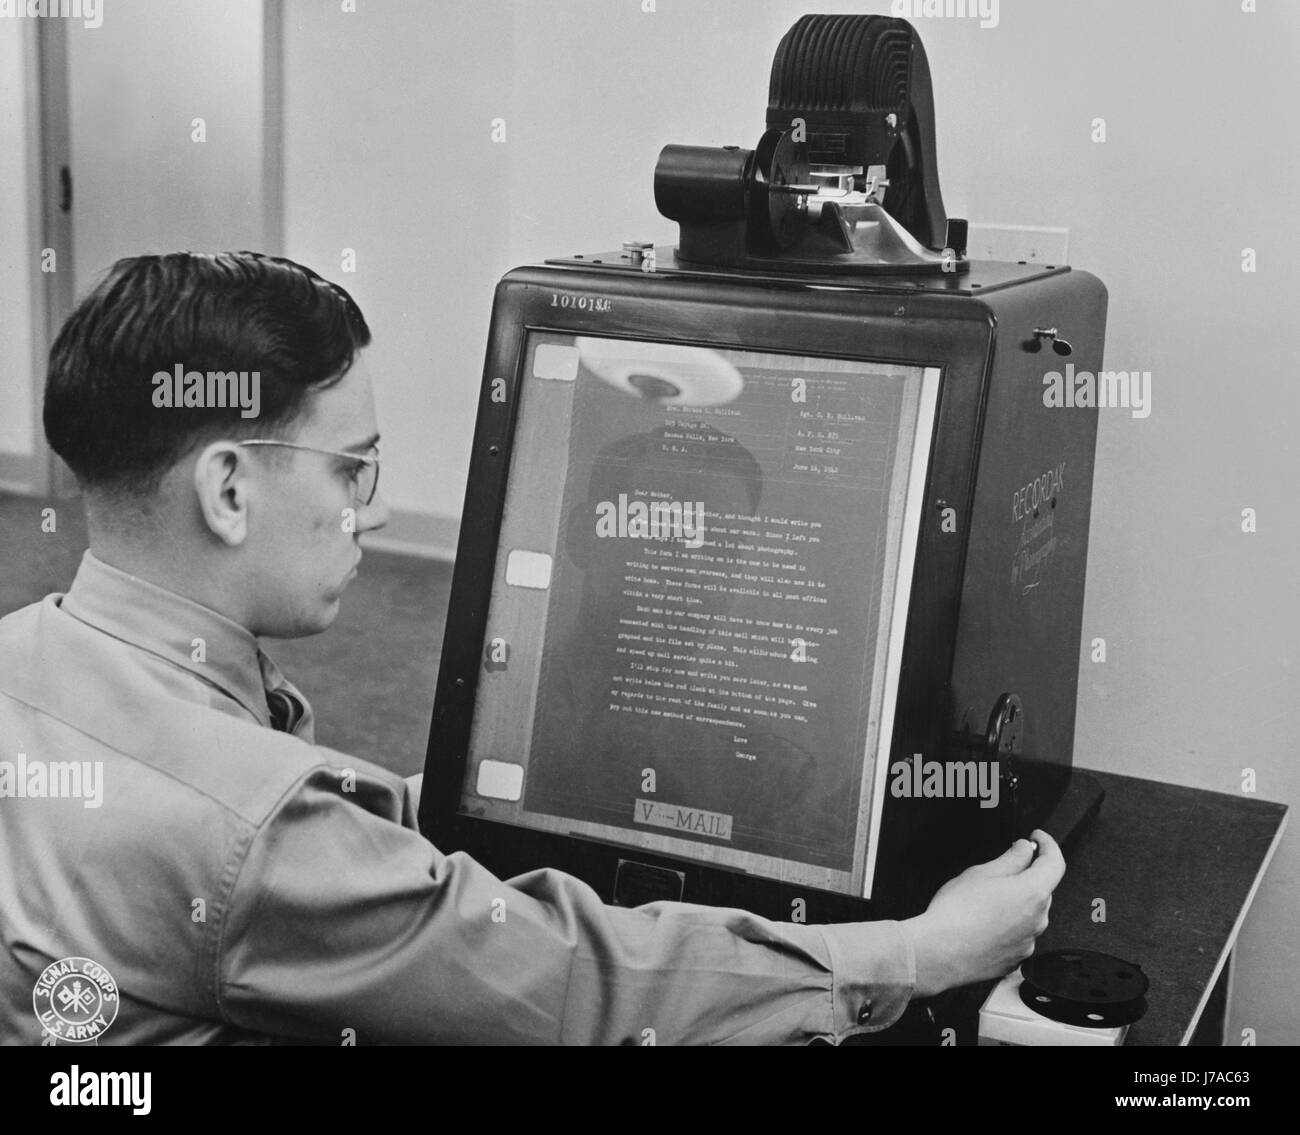 V-mail is inspected for flaws on an enlarging reader at the Pentagon, Washington, D.C., 1943. Stock Photo